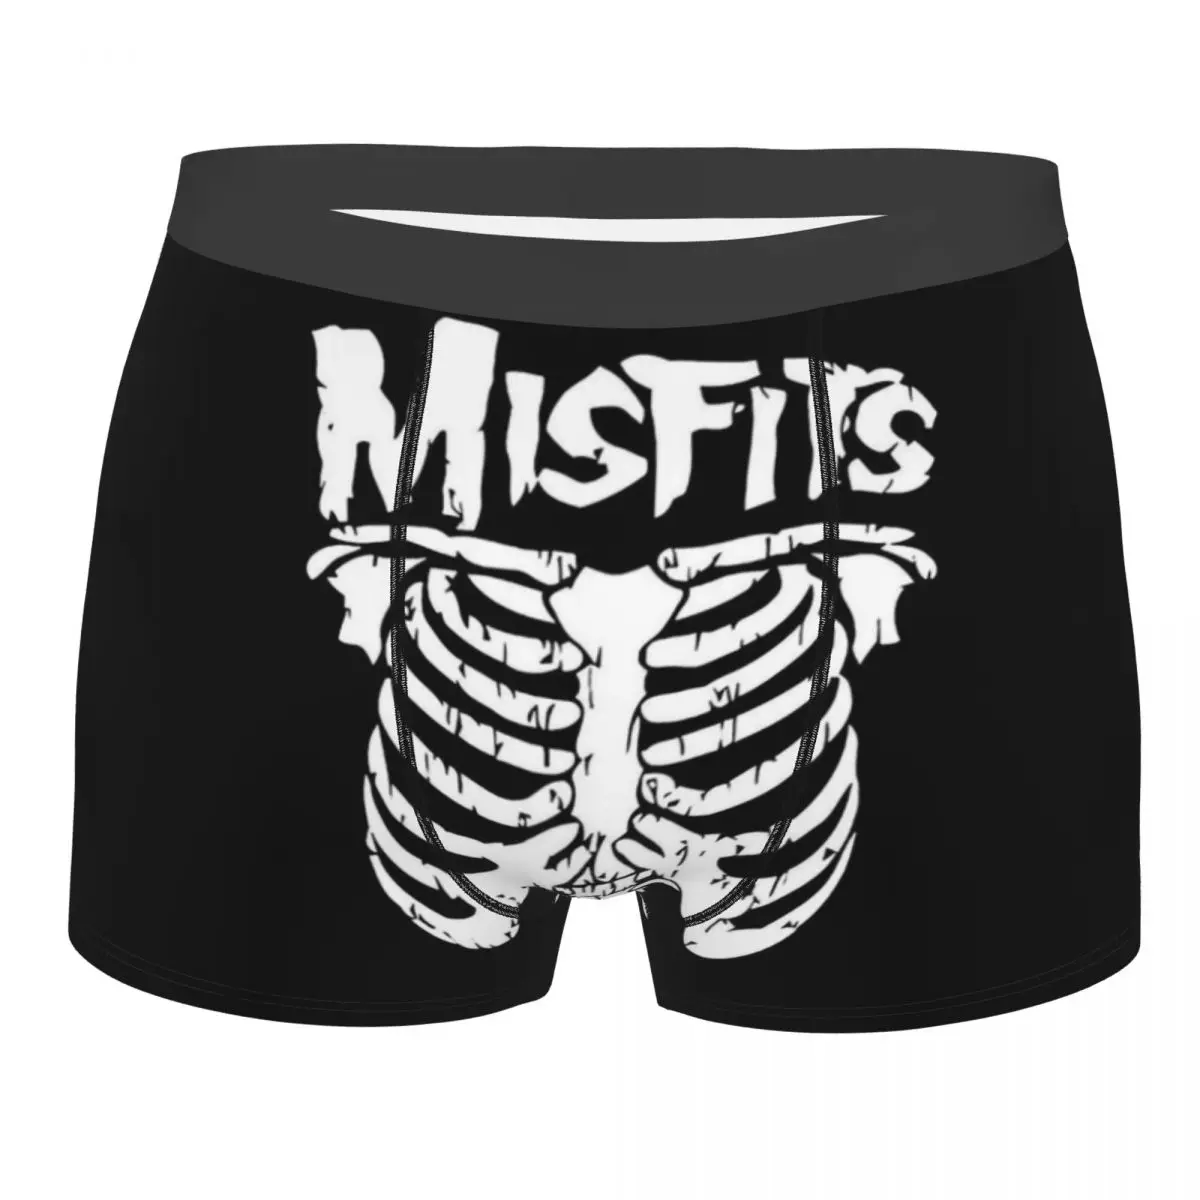 Misfits Skull Men's Boxer Briefs special Highly Breathable Underpants High Quality 3D Print Shorts Gift Idea pngtree farming tractor green men s boxer briefs special highly breathable underpants top quality 3d print shorts gift idea